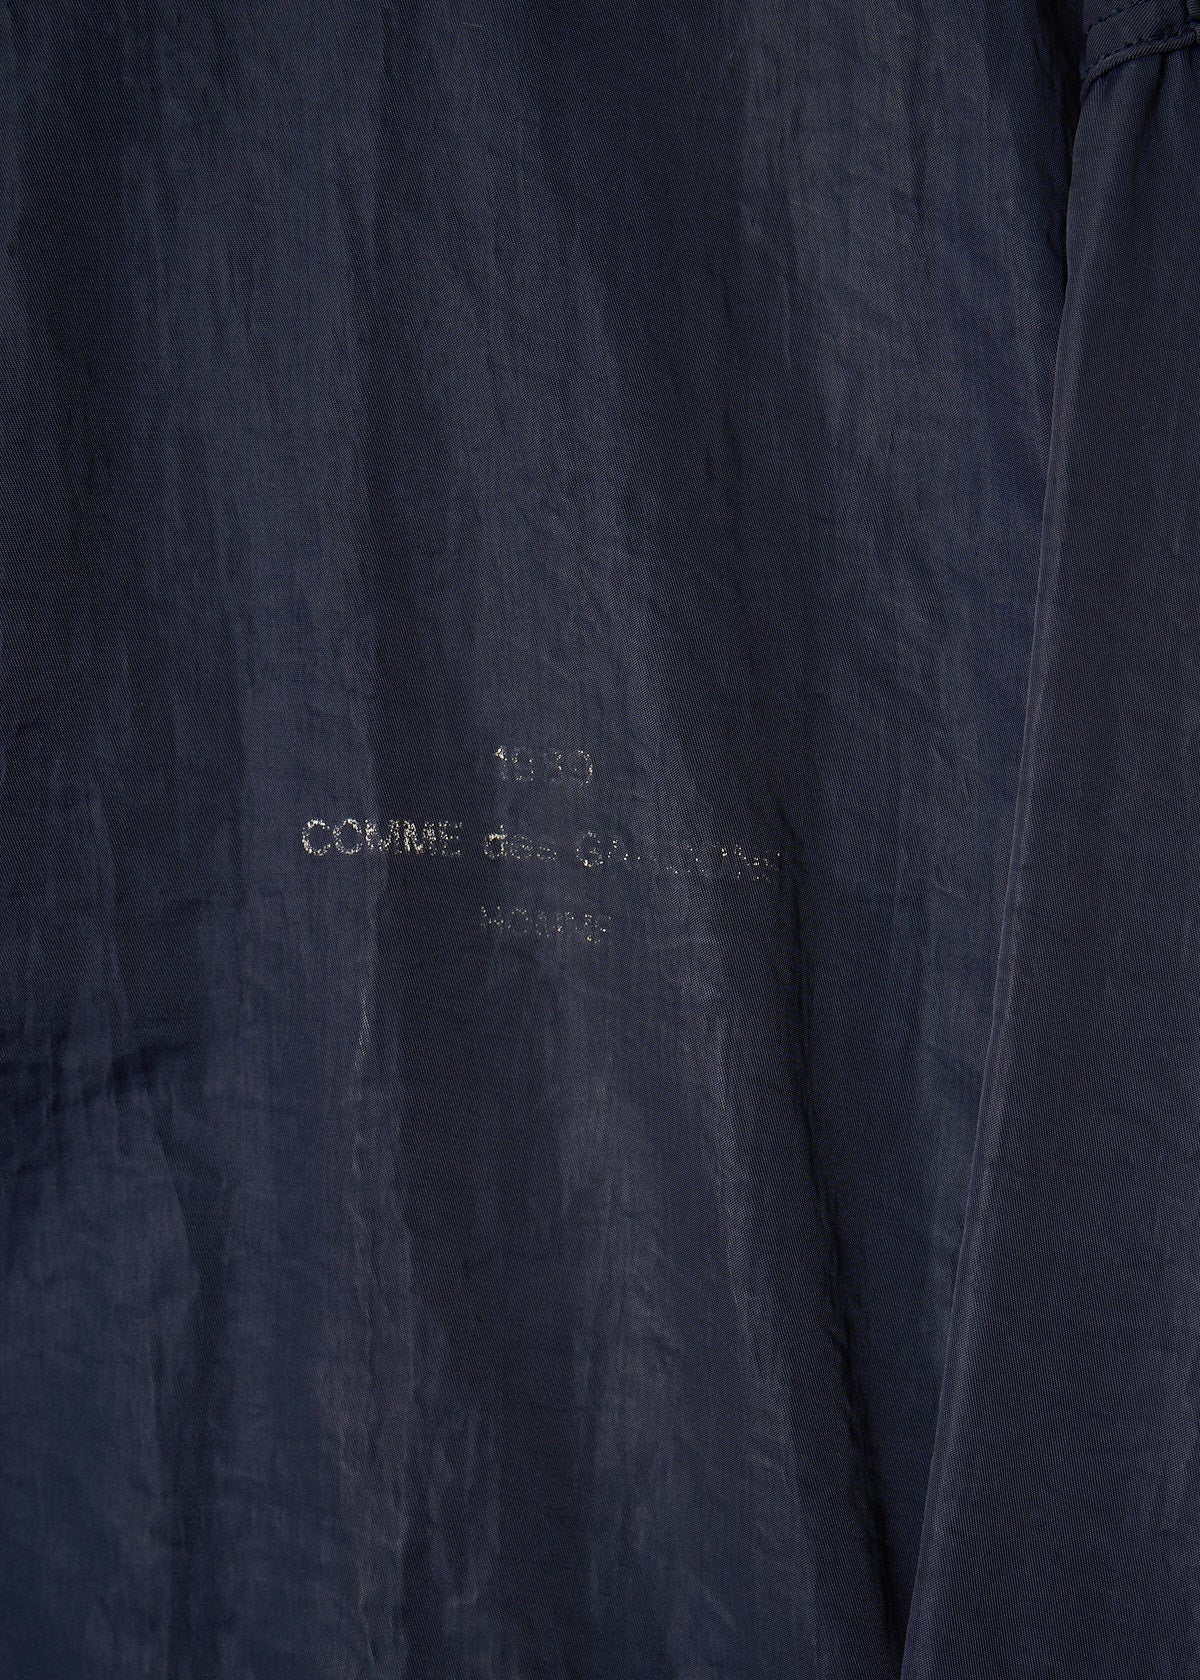 CDG HOMME BLUE SPELL OUT LOGO NYLON COACH JACKET 1989 - LARGE